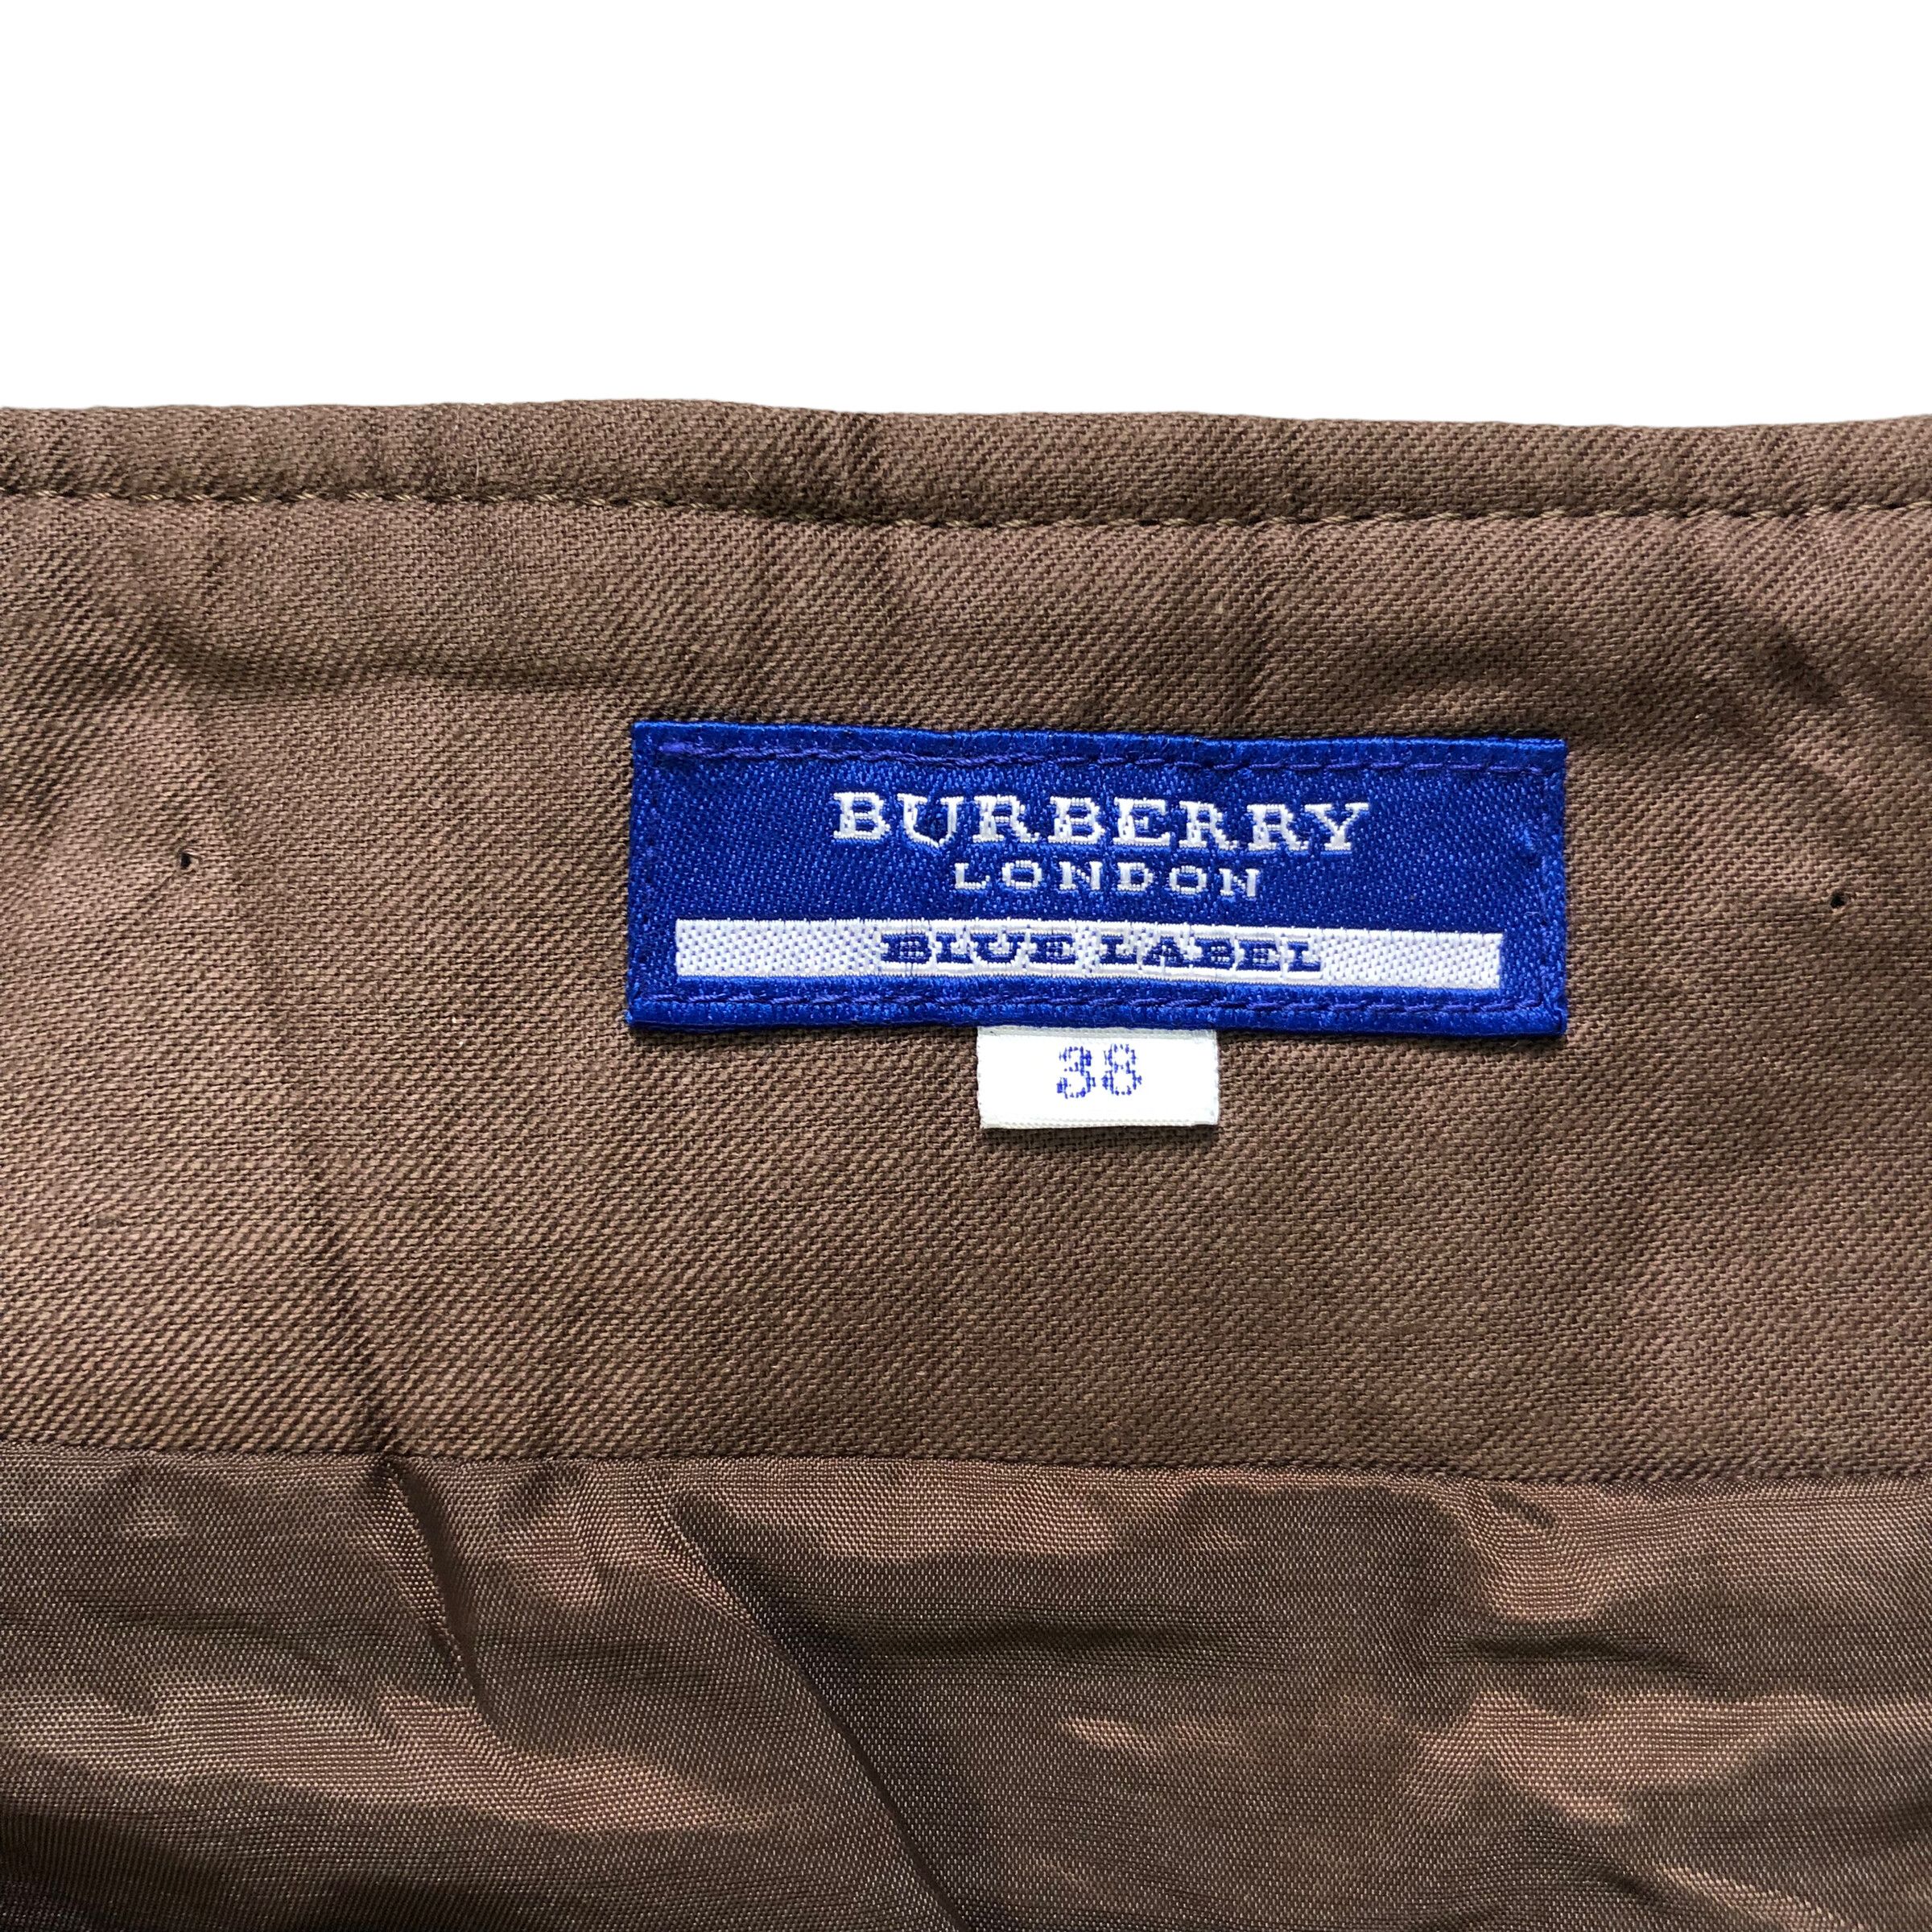 BURBERRY LONDON BLUE LABEL LUXURY BELTED SKIRTS #7280-125 - 7